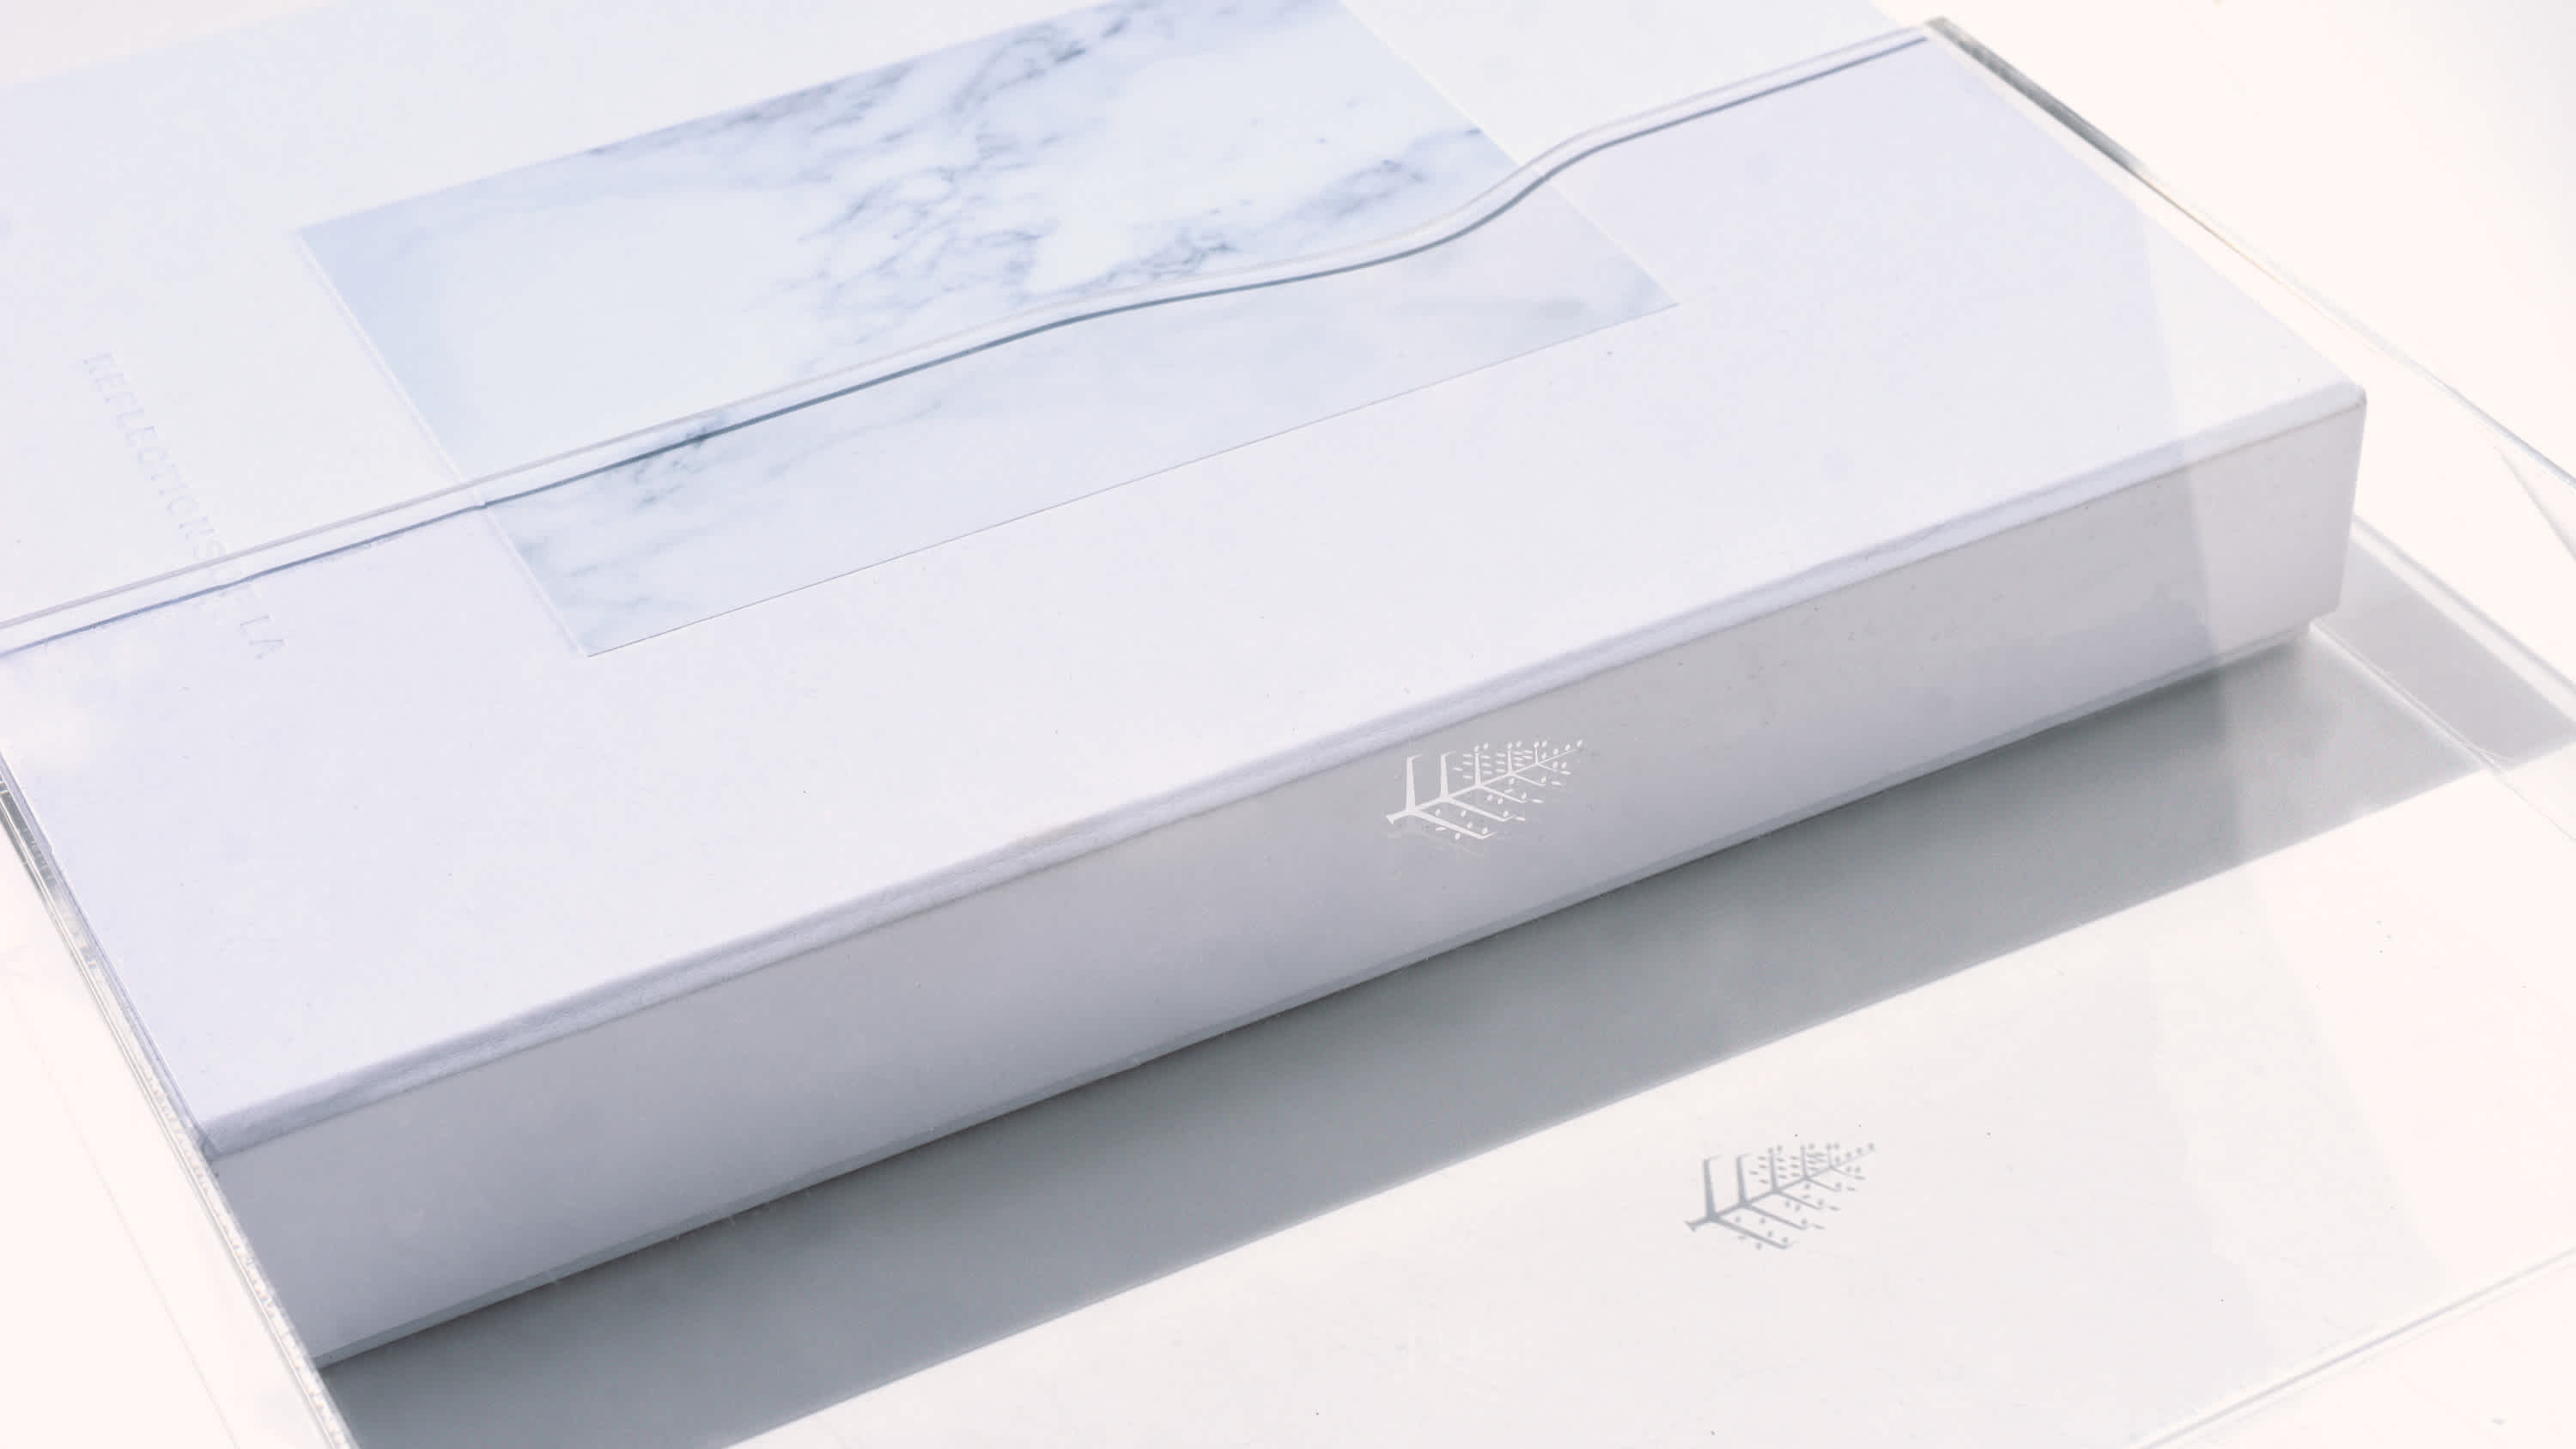 Discover the chic sophistication of the Four Seasons Los Angeles compendium, with a side view revealing the harmonious blend of a marble motif and crisp, white elegance, reflecting LA’s refined taste and luxury living. Ideal for those seeking a touch of LA's design finesse in their collection.